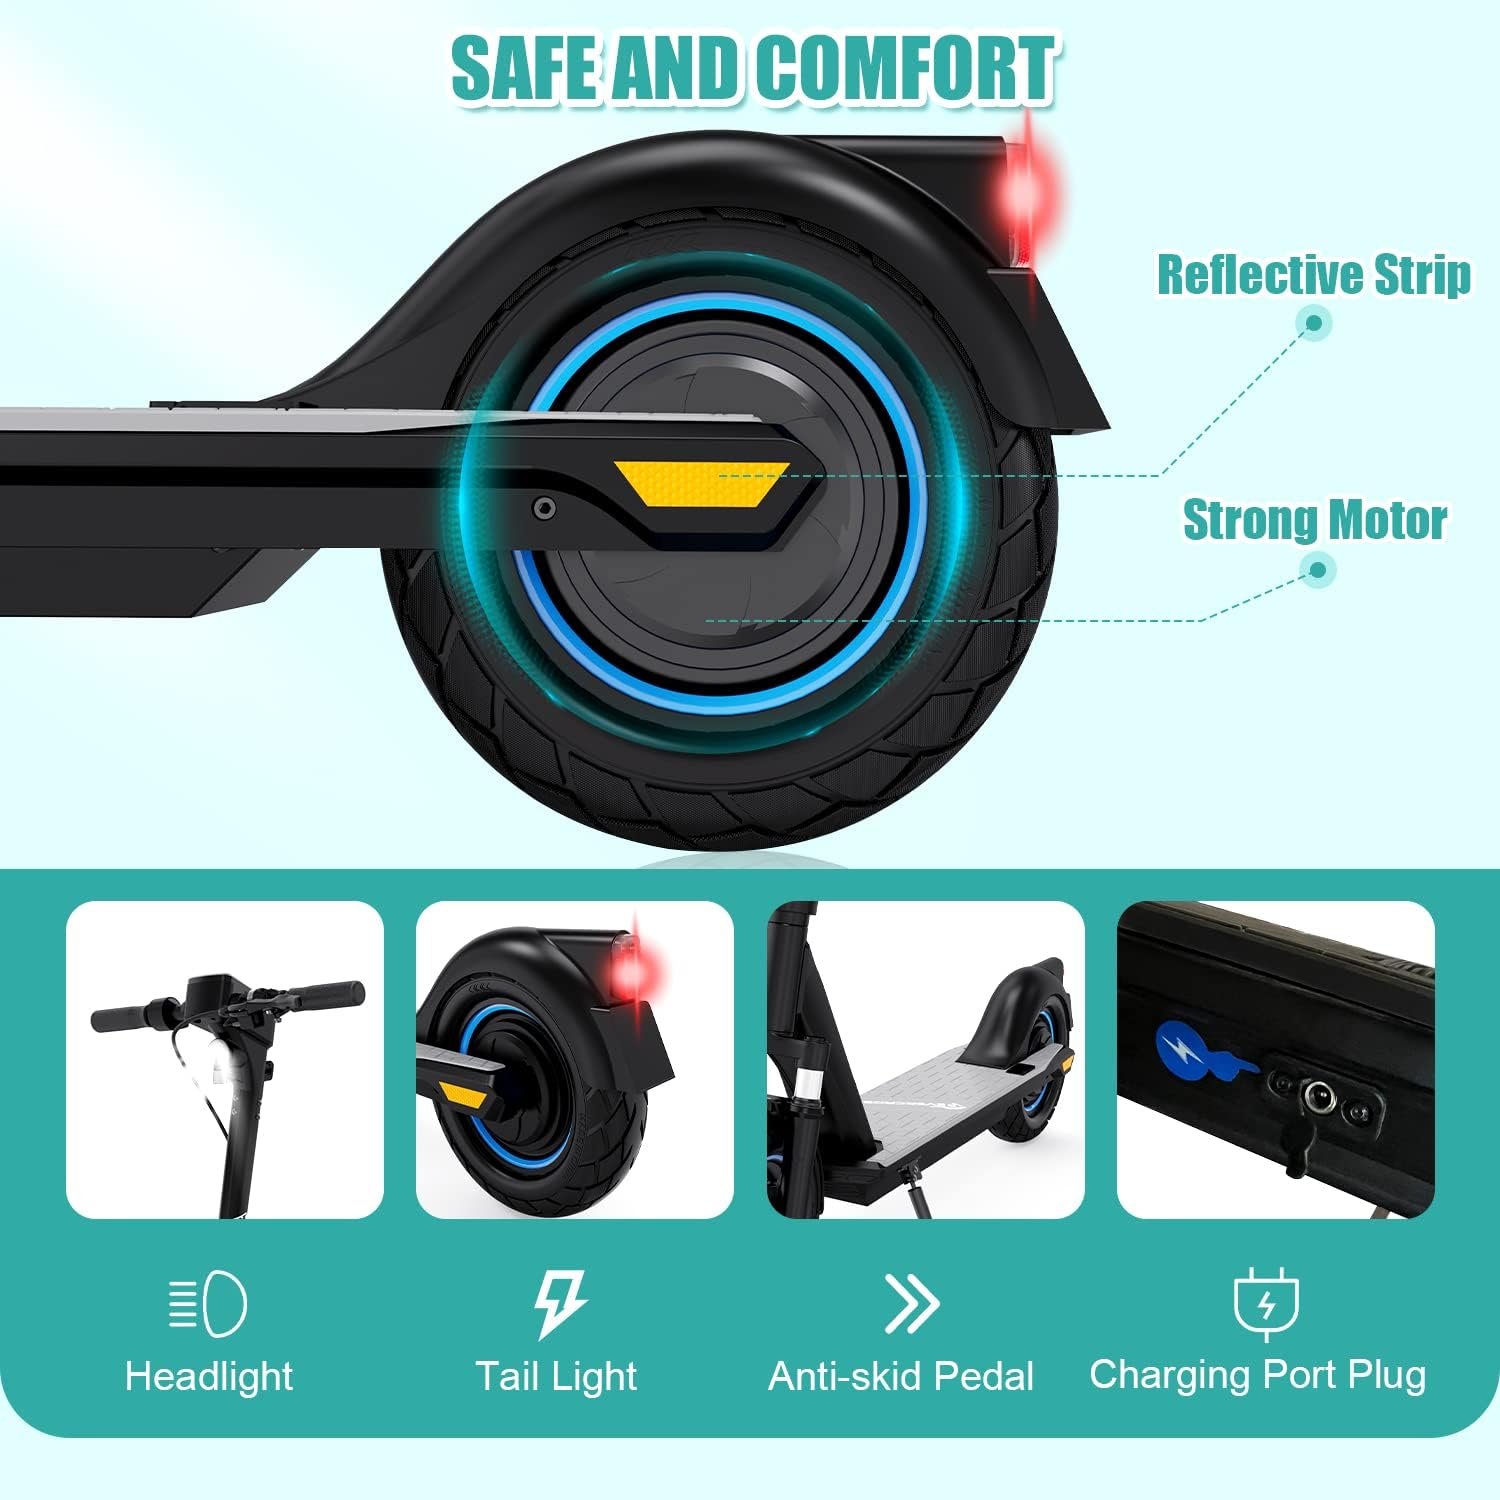 EVERCROSS EV10Z Electric Scooter, 500W Peak Motor  22 Miles Range 19 Mph, App-Enabled E-Scooter, 10 Solid Tires, Folding Electric Scooter for Adults Teenagers